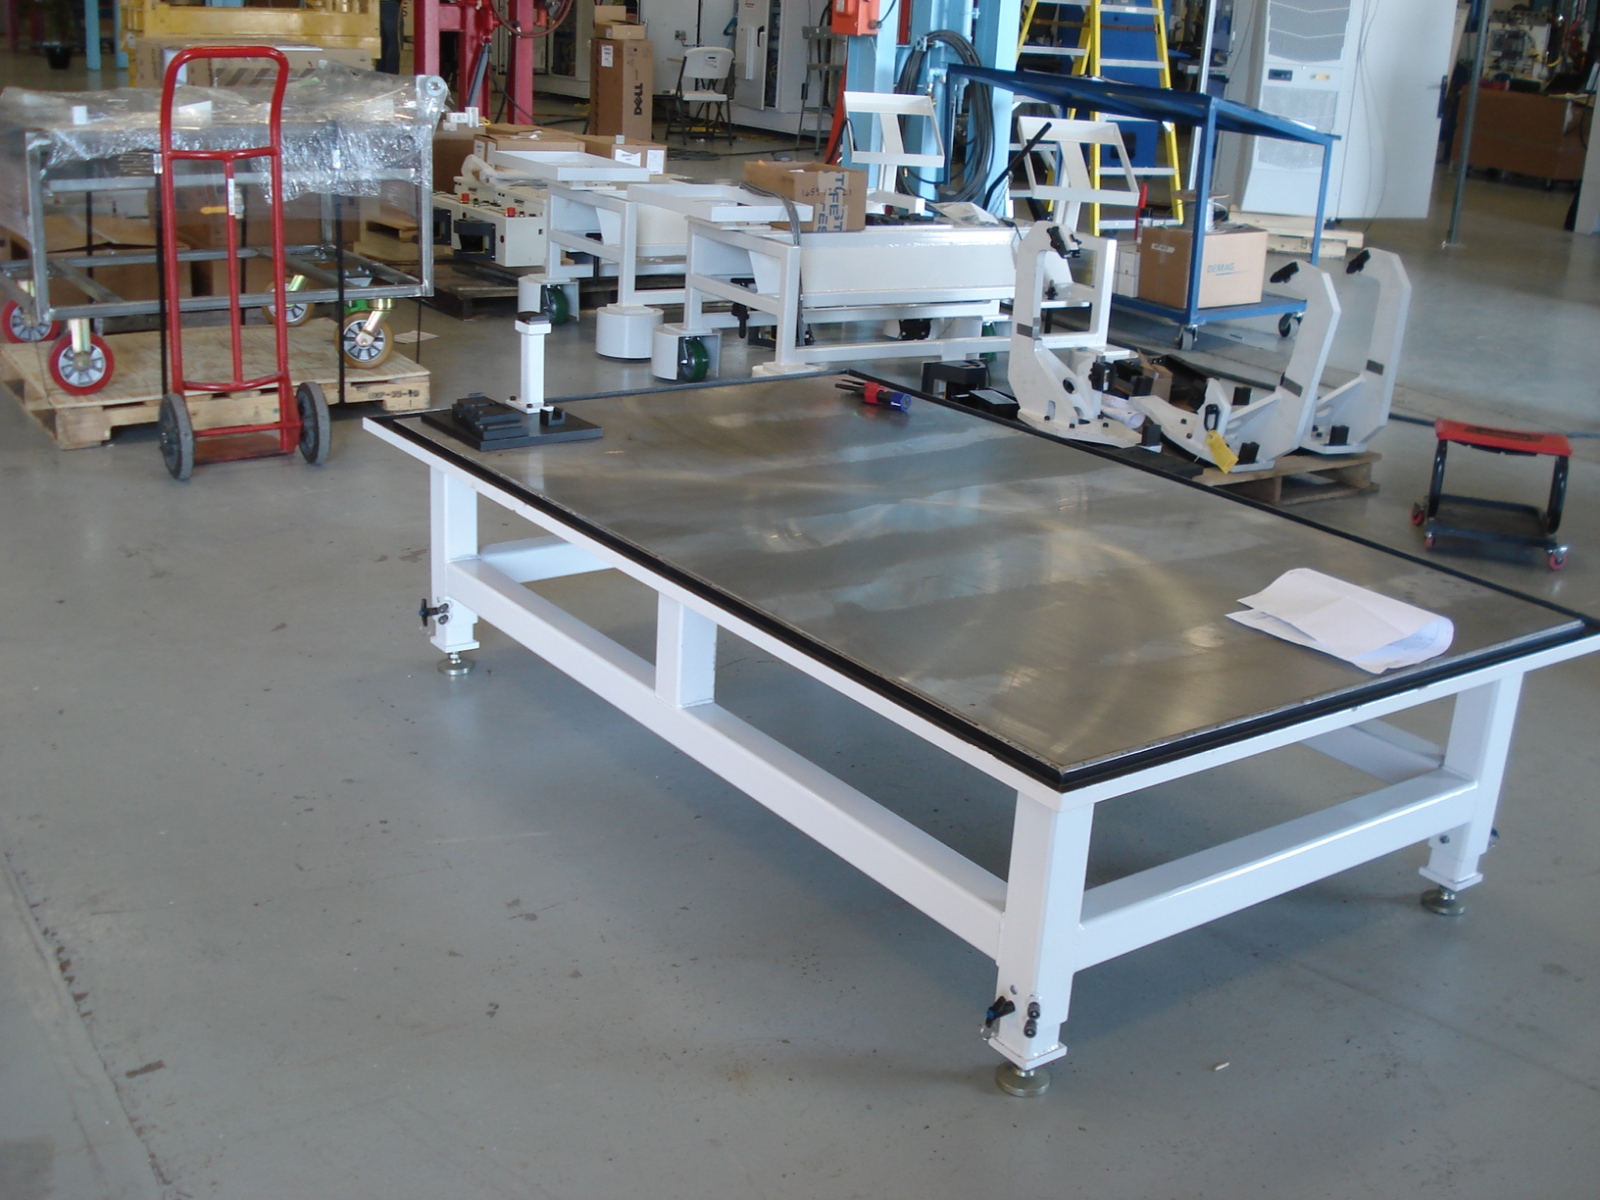 Transmission repair table with adjustable legs and perimeter oil drip trough.